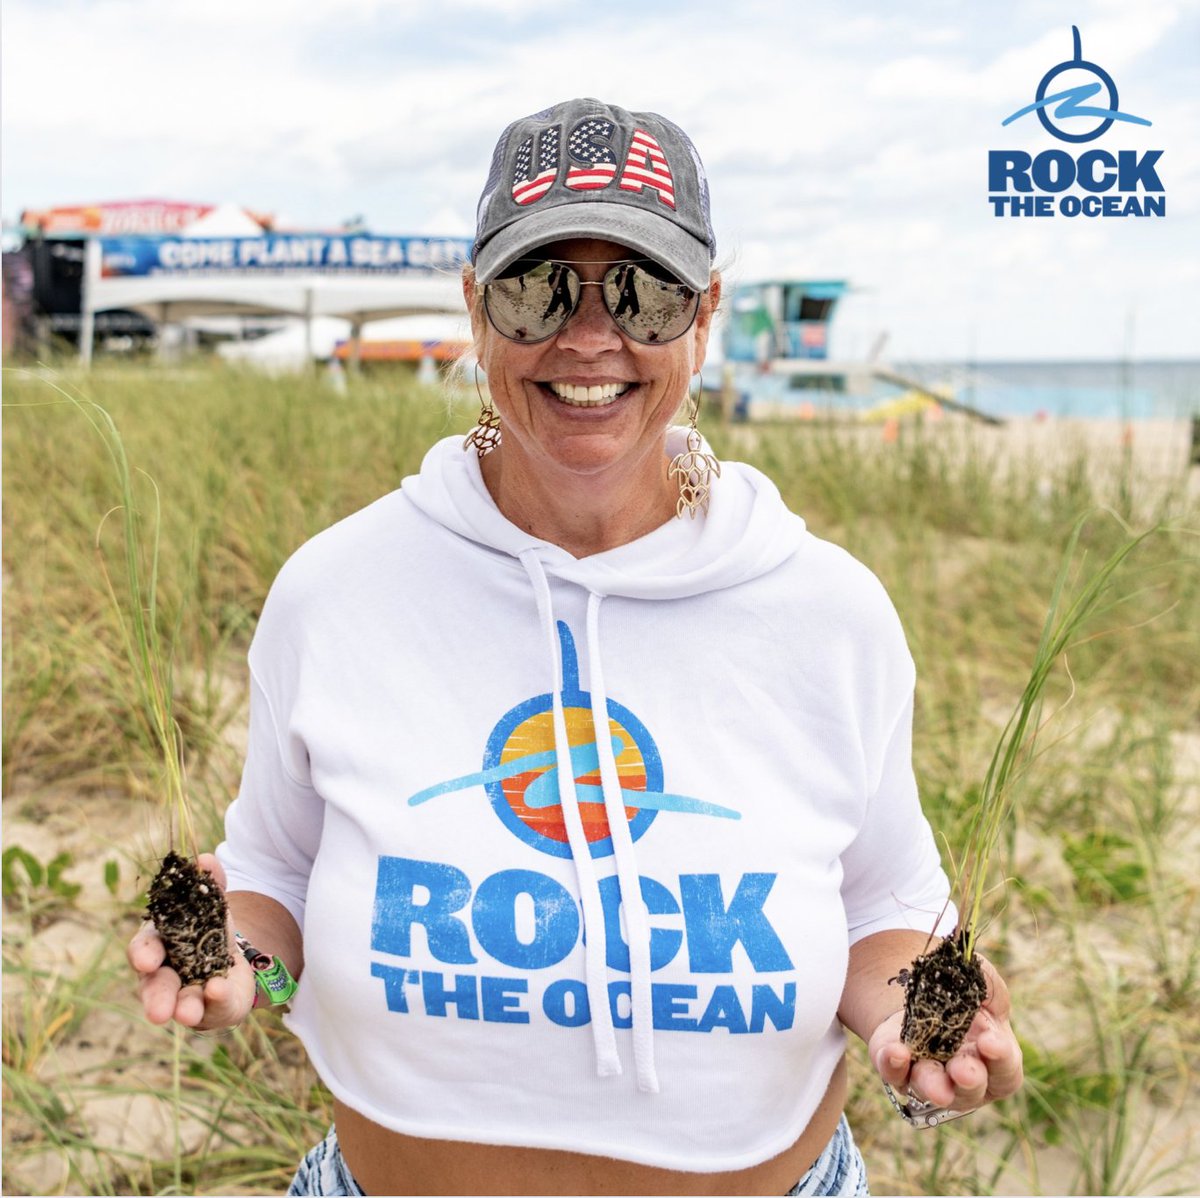 Look good, do good, feel good with every purchase! 🌊 When you rock our merch, you Rock The Ocean and help support initiatives like: ⭐️Beach Cleanups ⭐️Turtle Hatchling Rescues ⭐️Sea Turtle Rehabs ⭐️Sea Oat Planting ⭐️ & so more! (🔗 in bio to get yours today.)